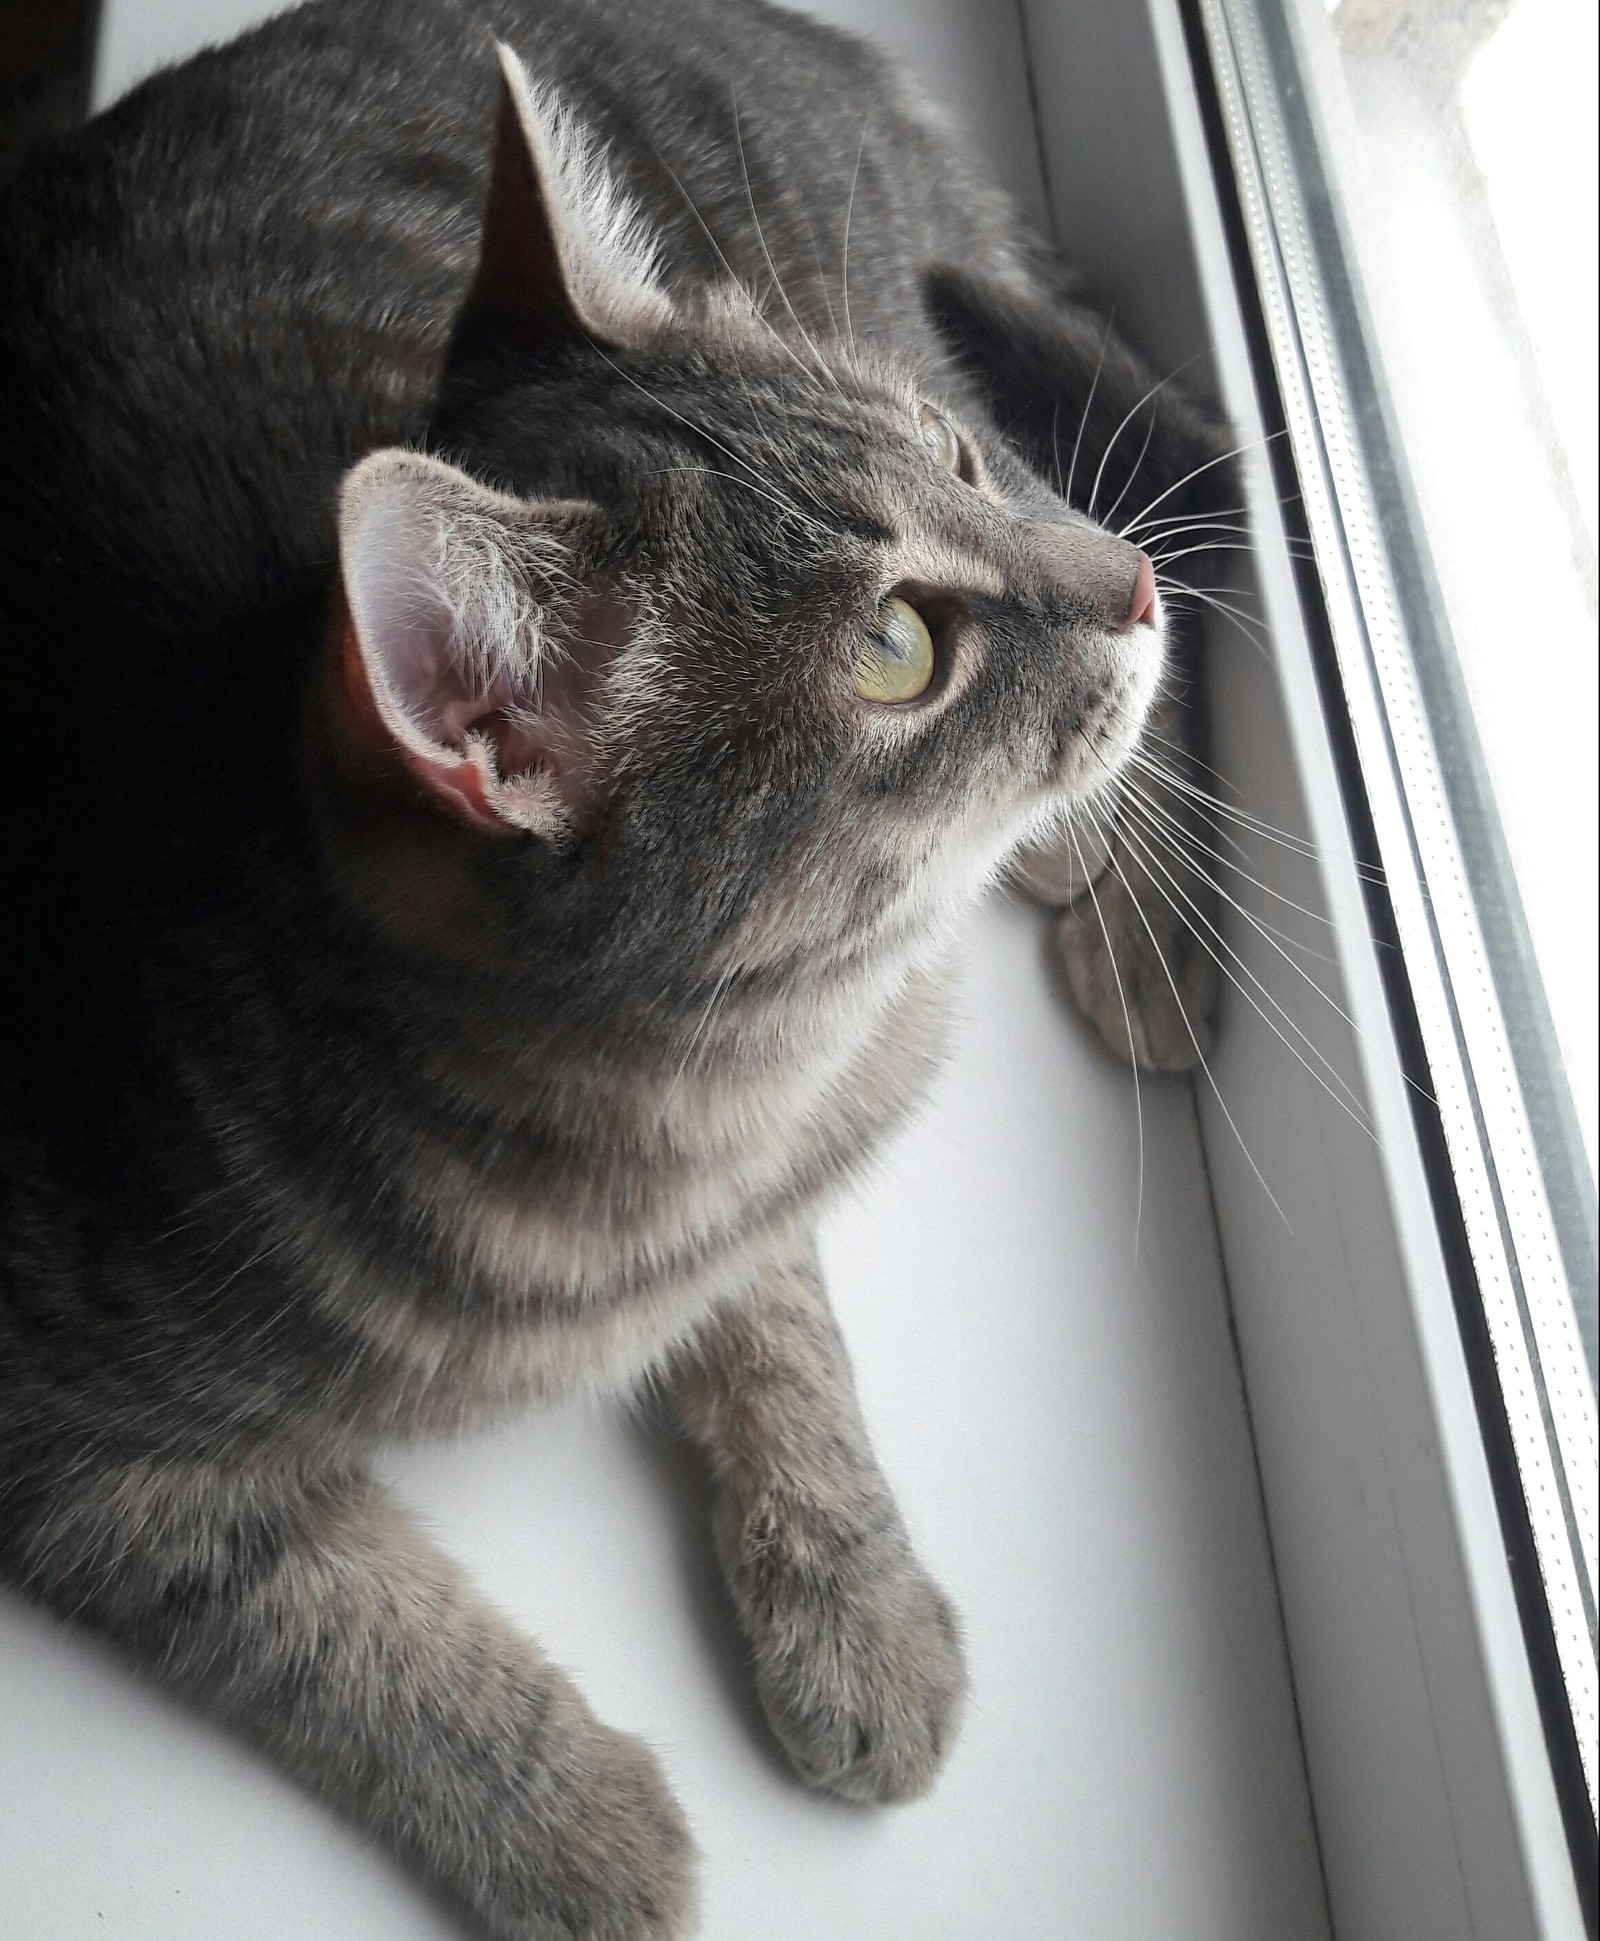 Riveting at the window - My, cat, Female, Women